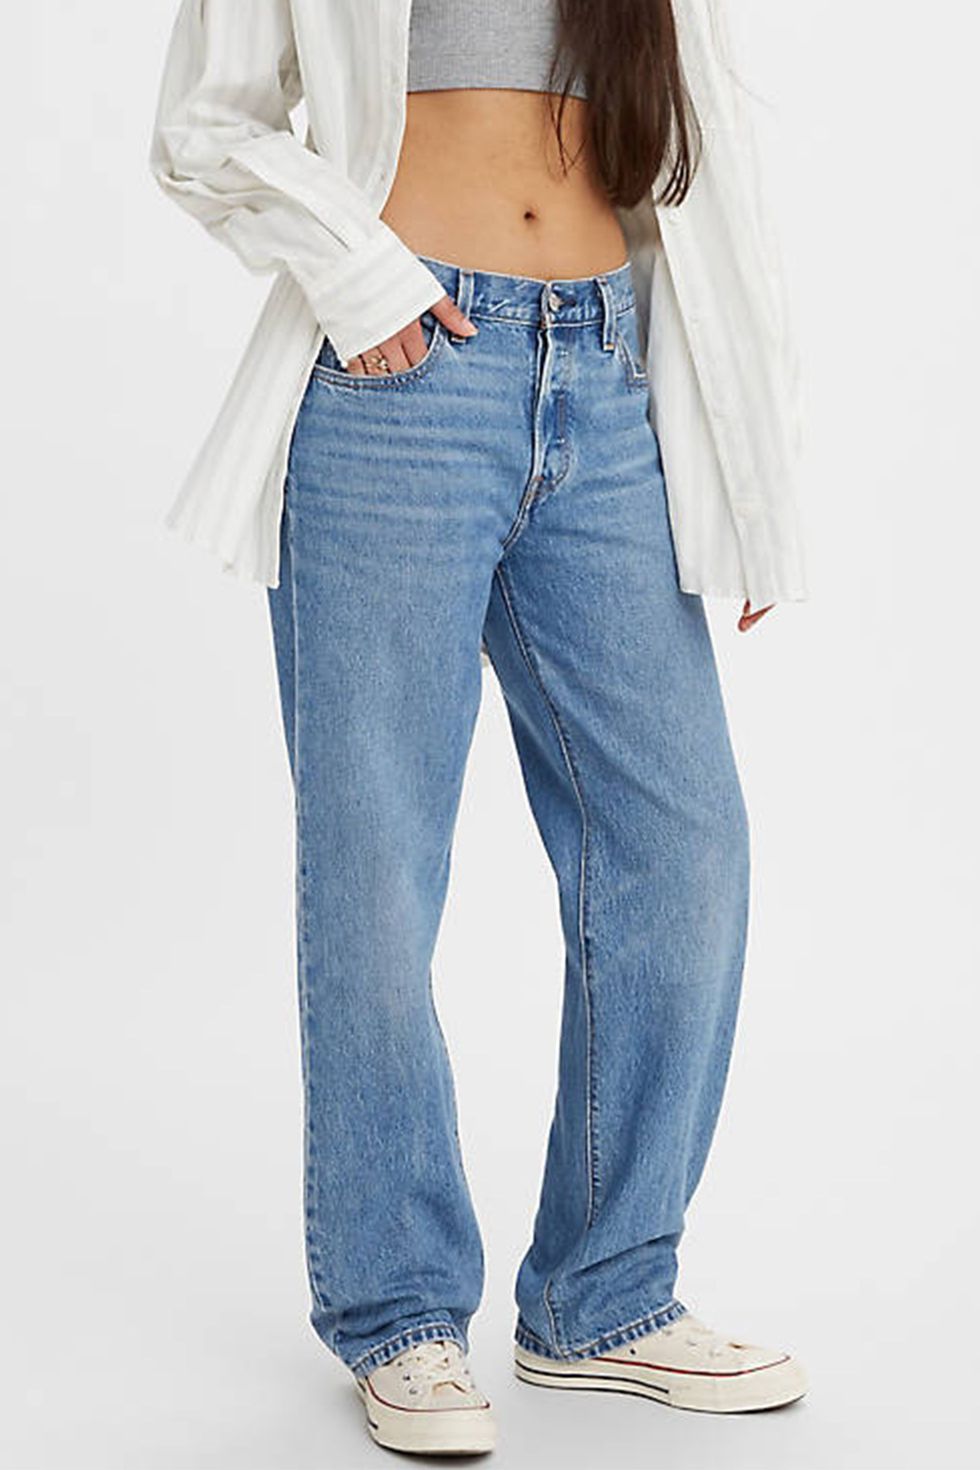 How to Find The Best High Waisted Mom Jeans For Any Size - Posh in Progress